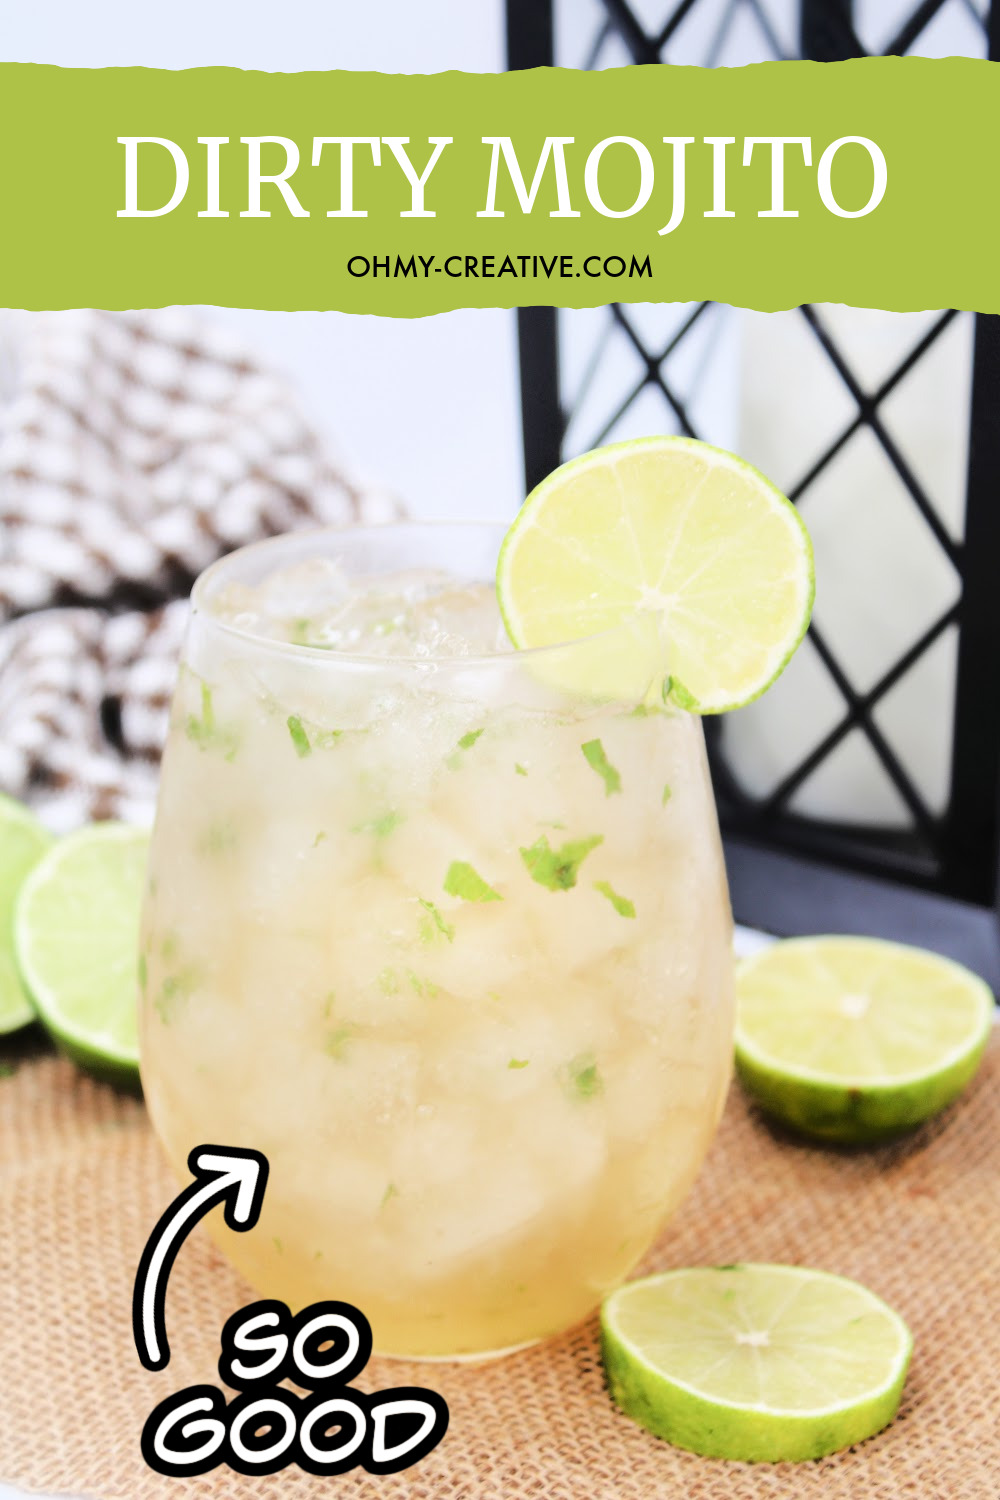 This dirty mojito cocktail is sitting on a burlap background with a black and white checked napkin and a black summer lantern. Garnished include slices of lime.